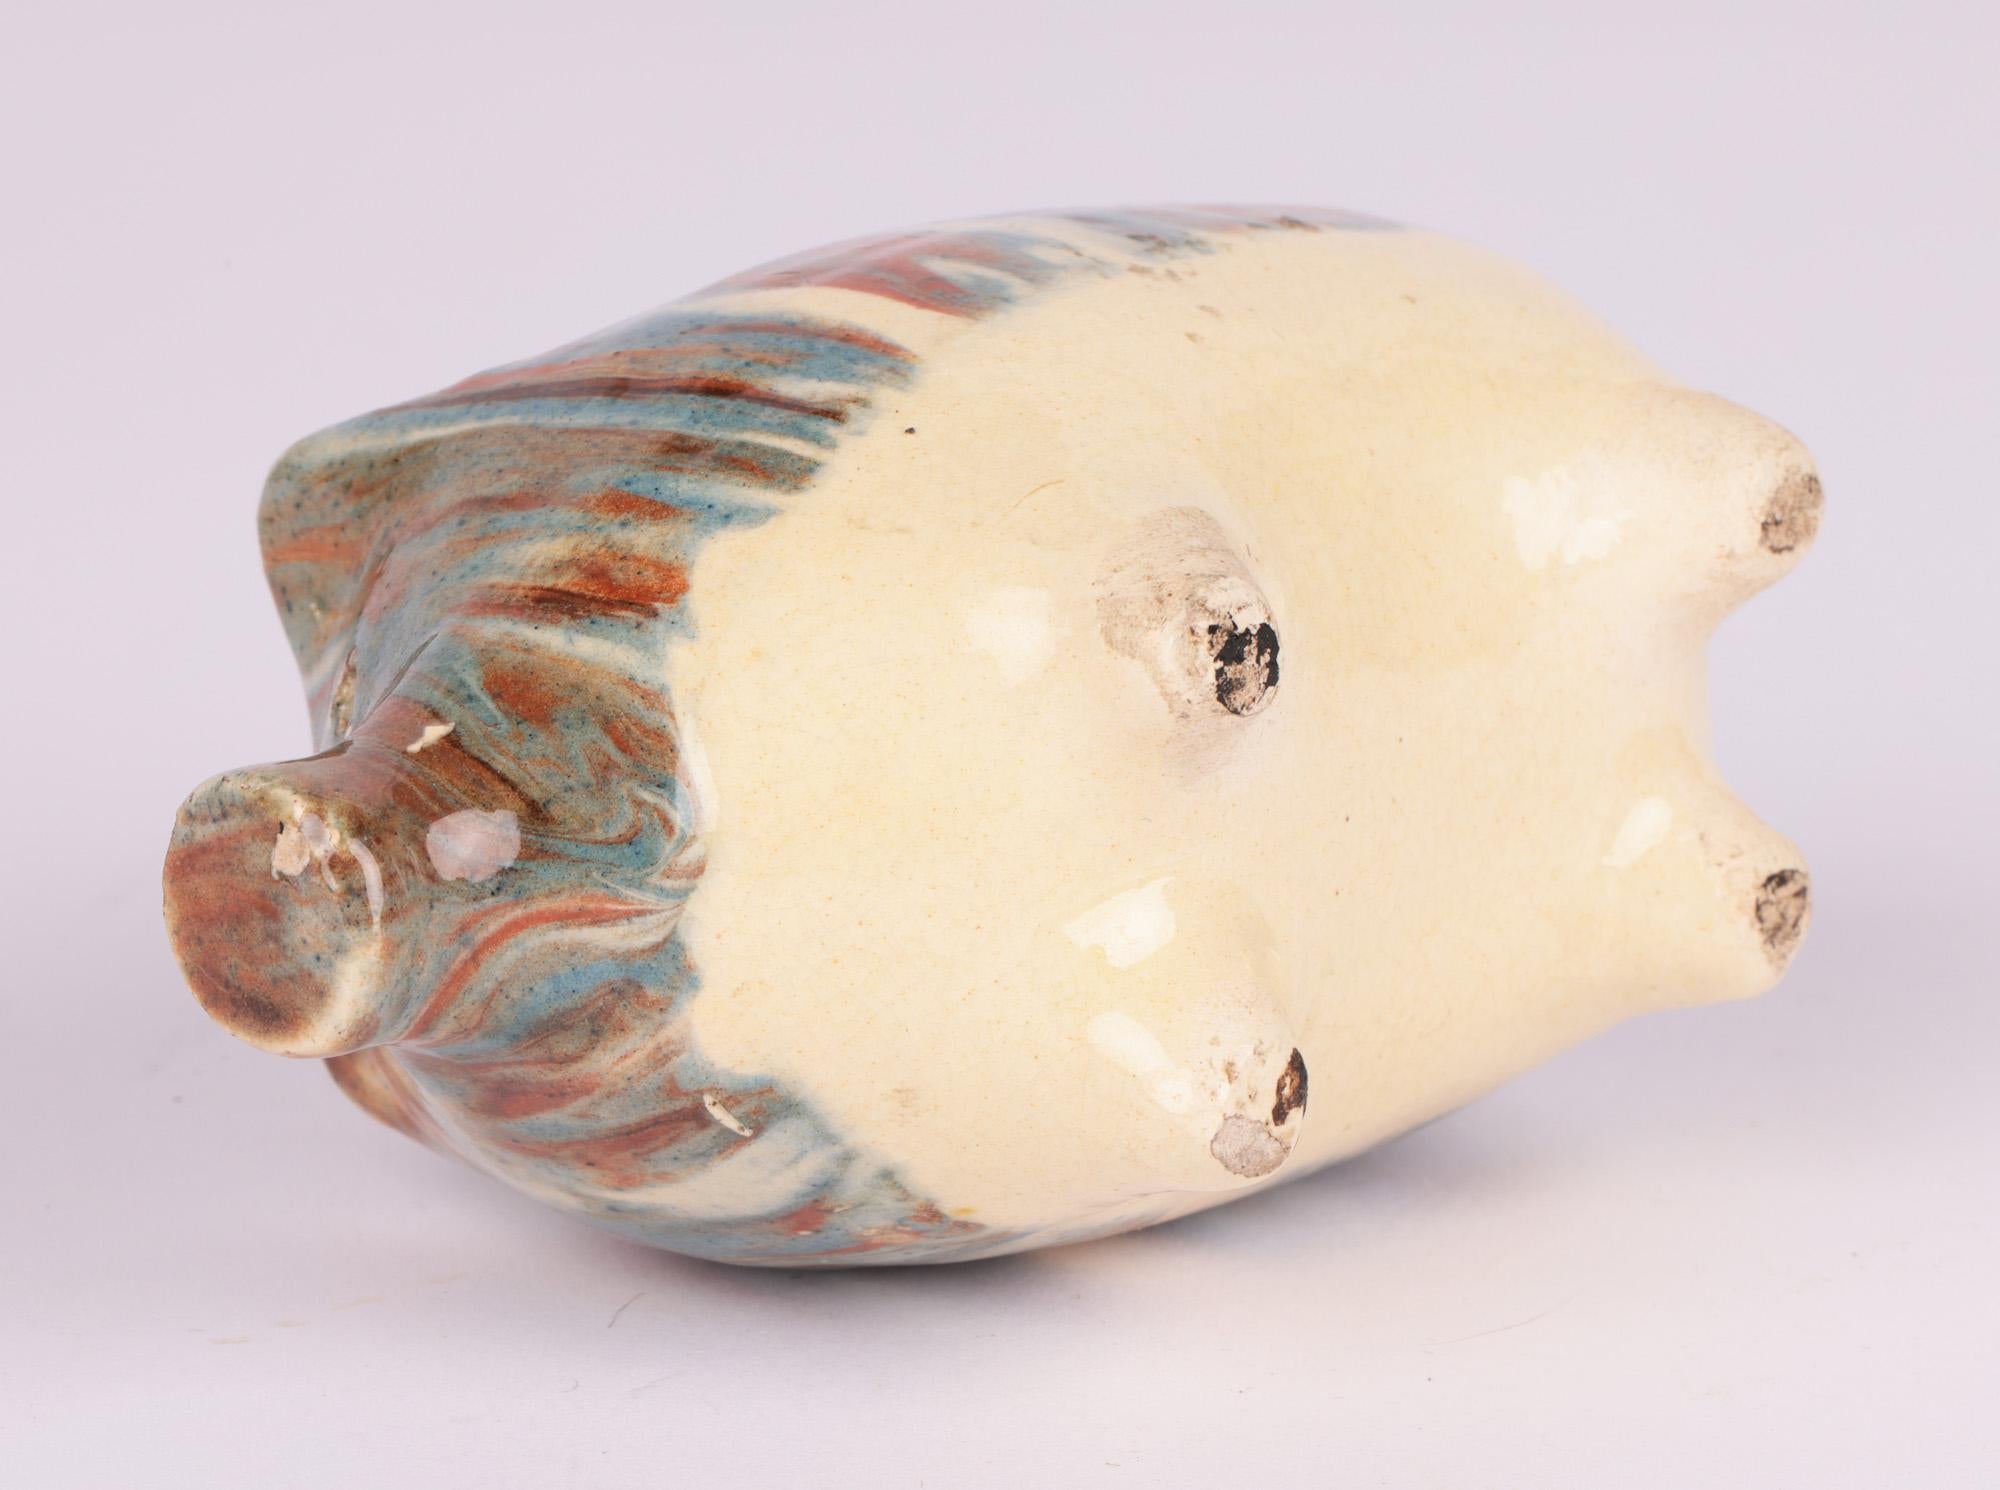 Staffordshire Marble Slipware Glazed Pottery Pig Moneybox For Sale 2